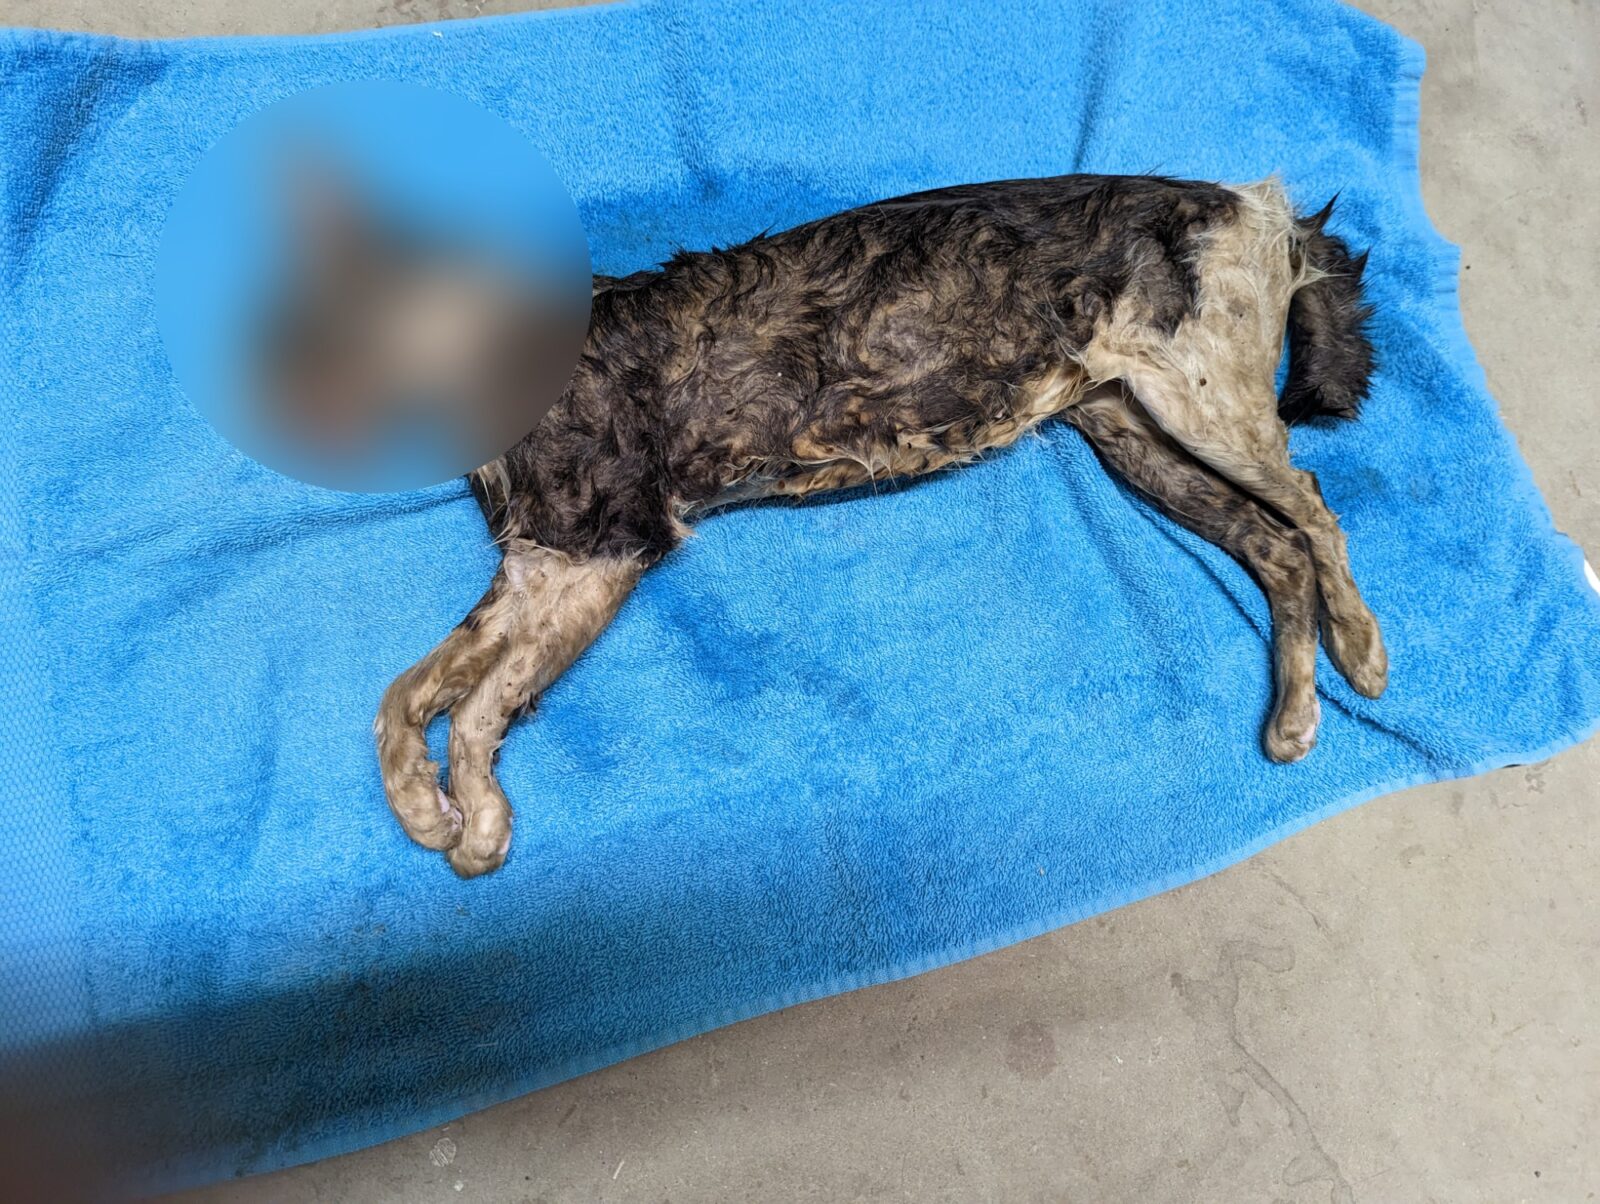 The condition the cat was found in after being found in a canalA